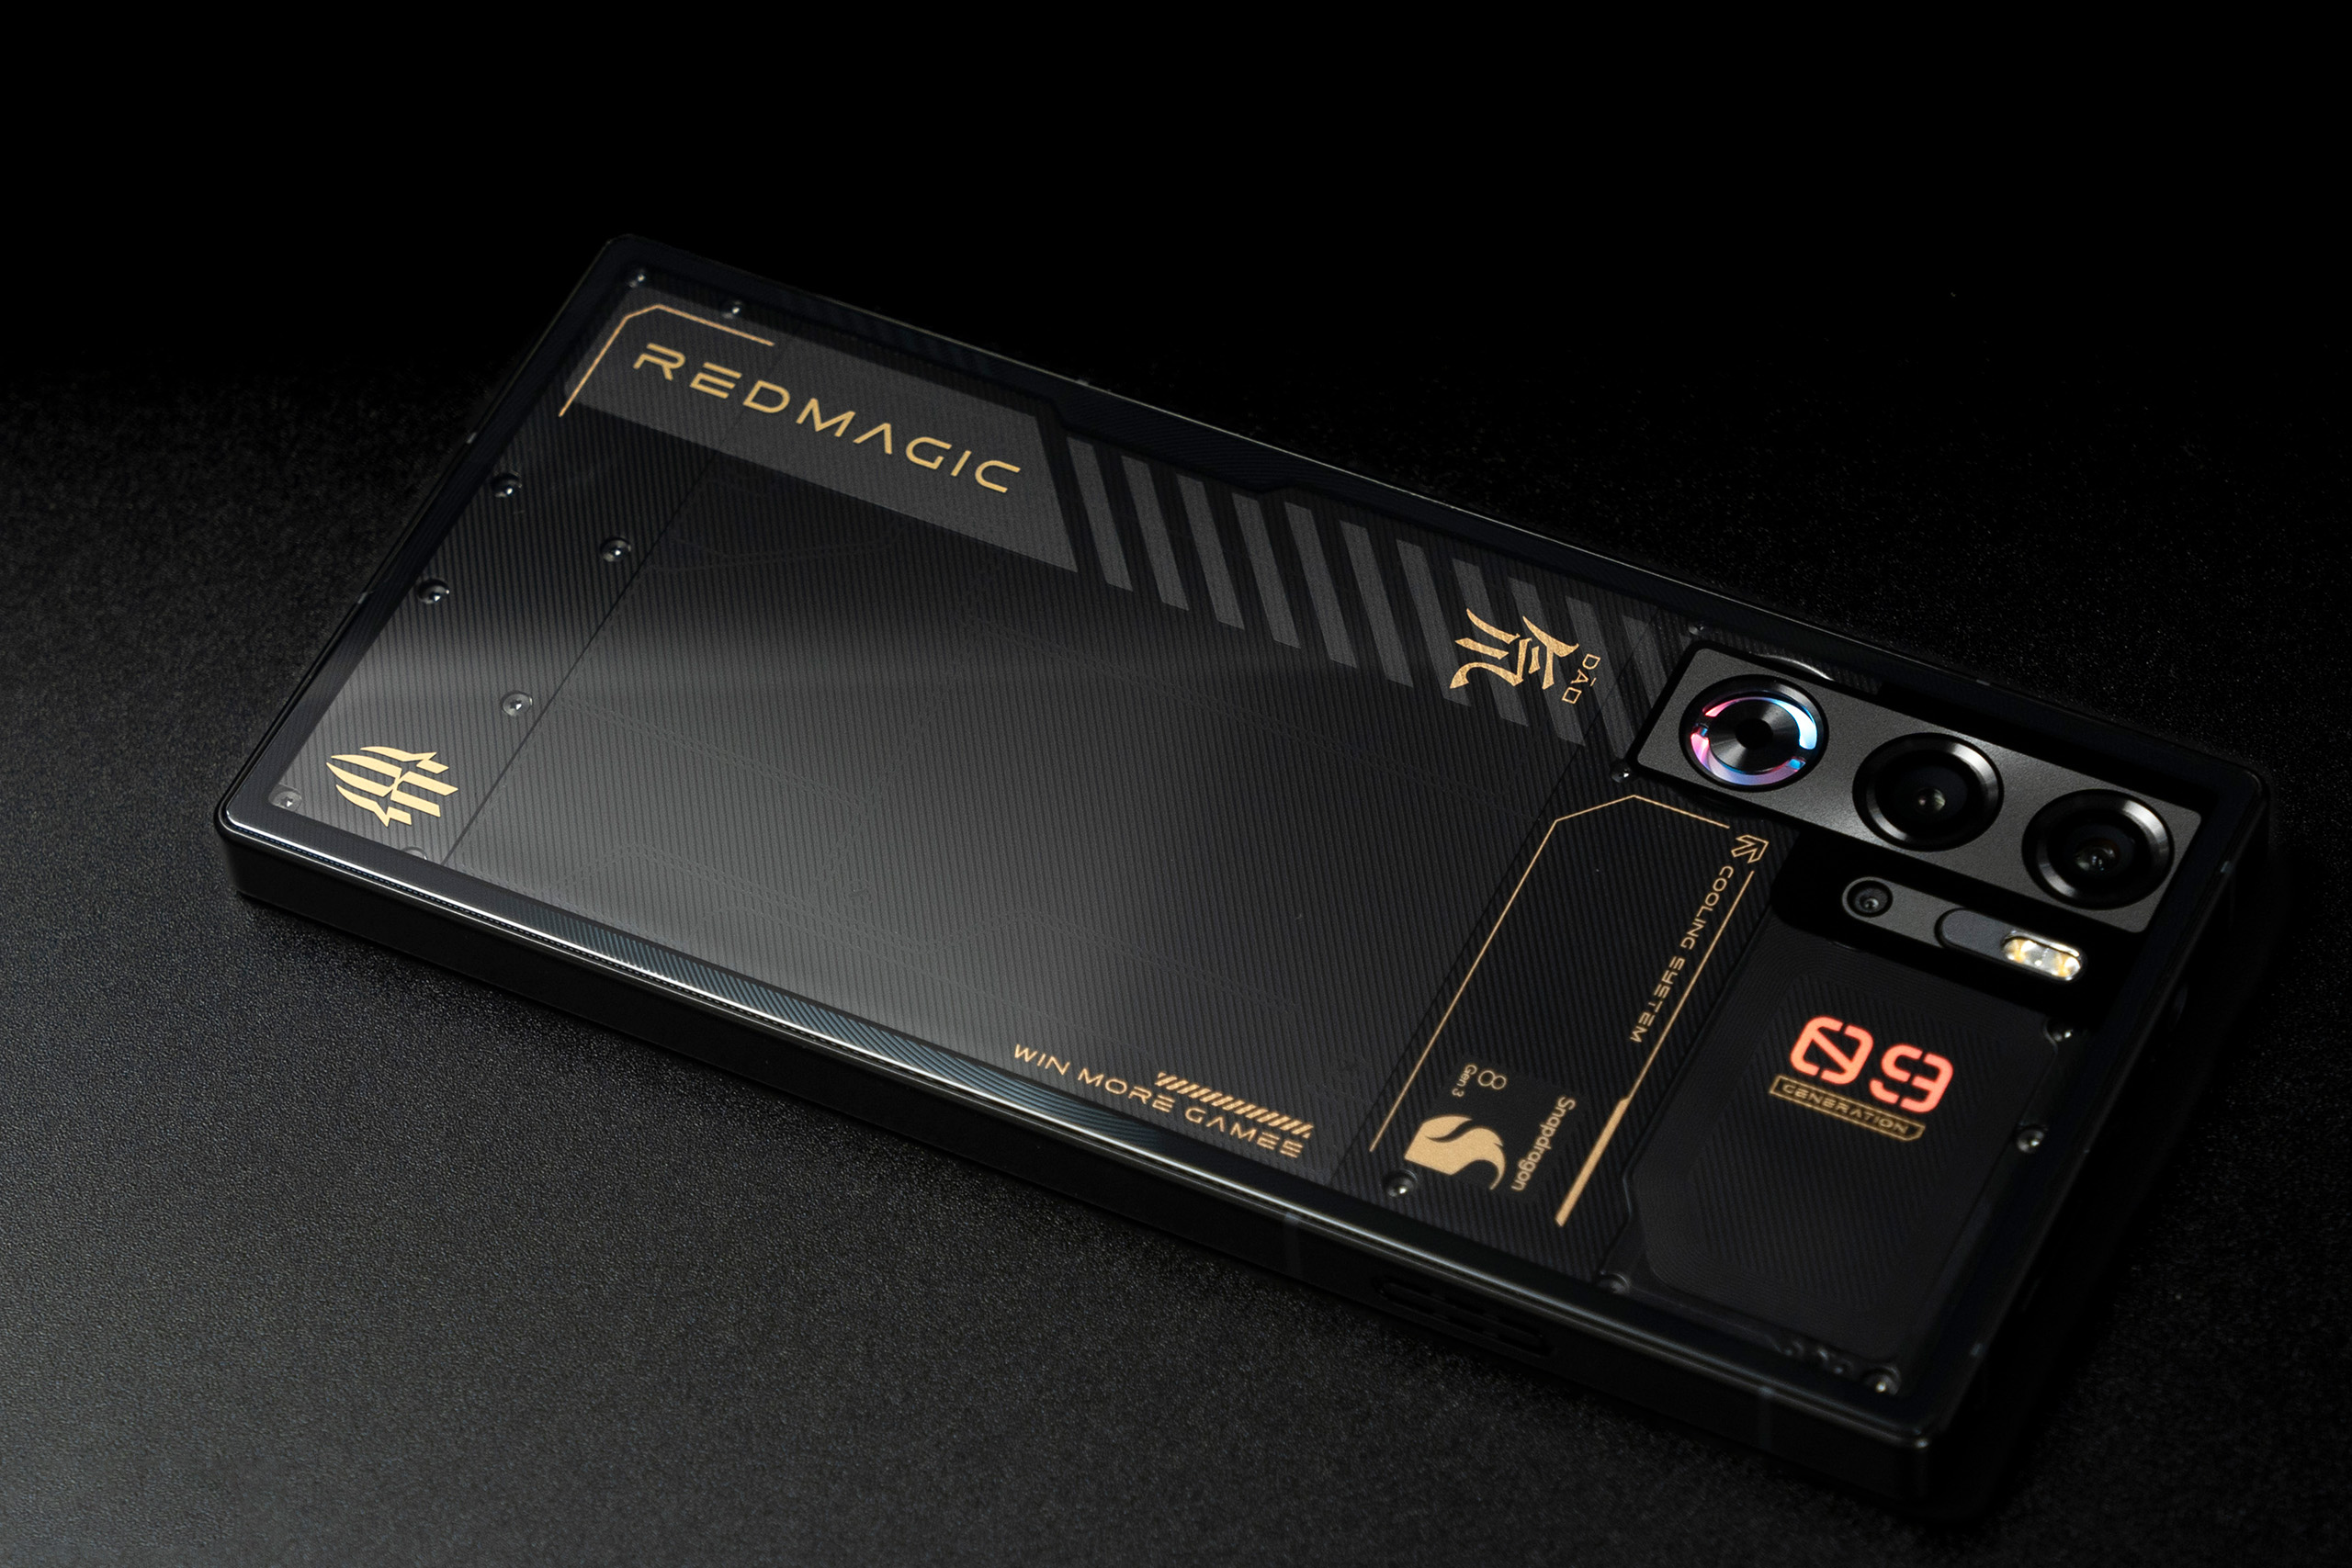 RedMagic 9 Pro Review: A Gaming Powerhouse